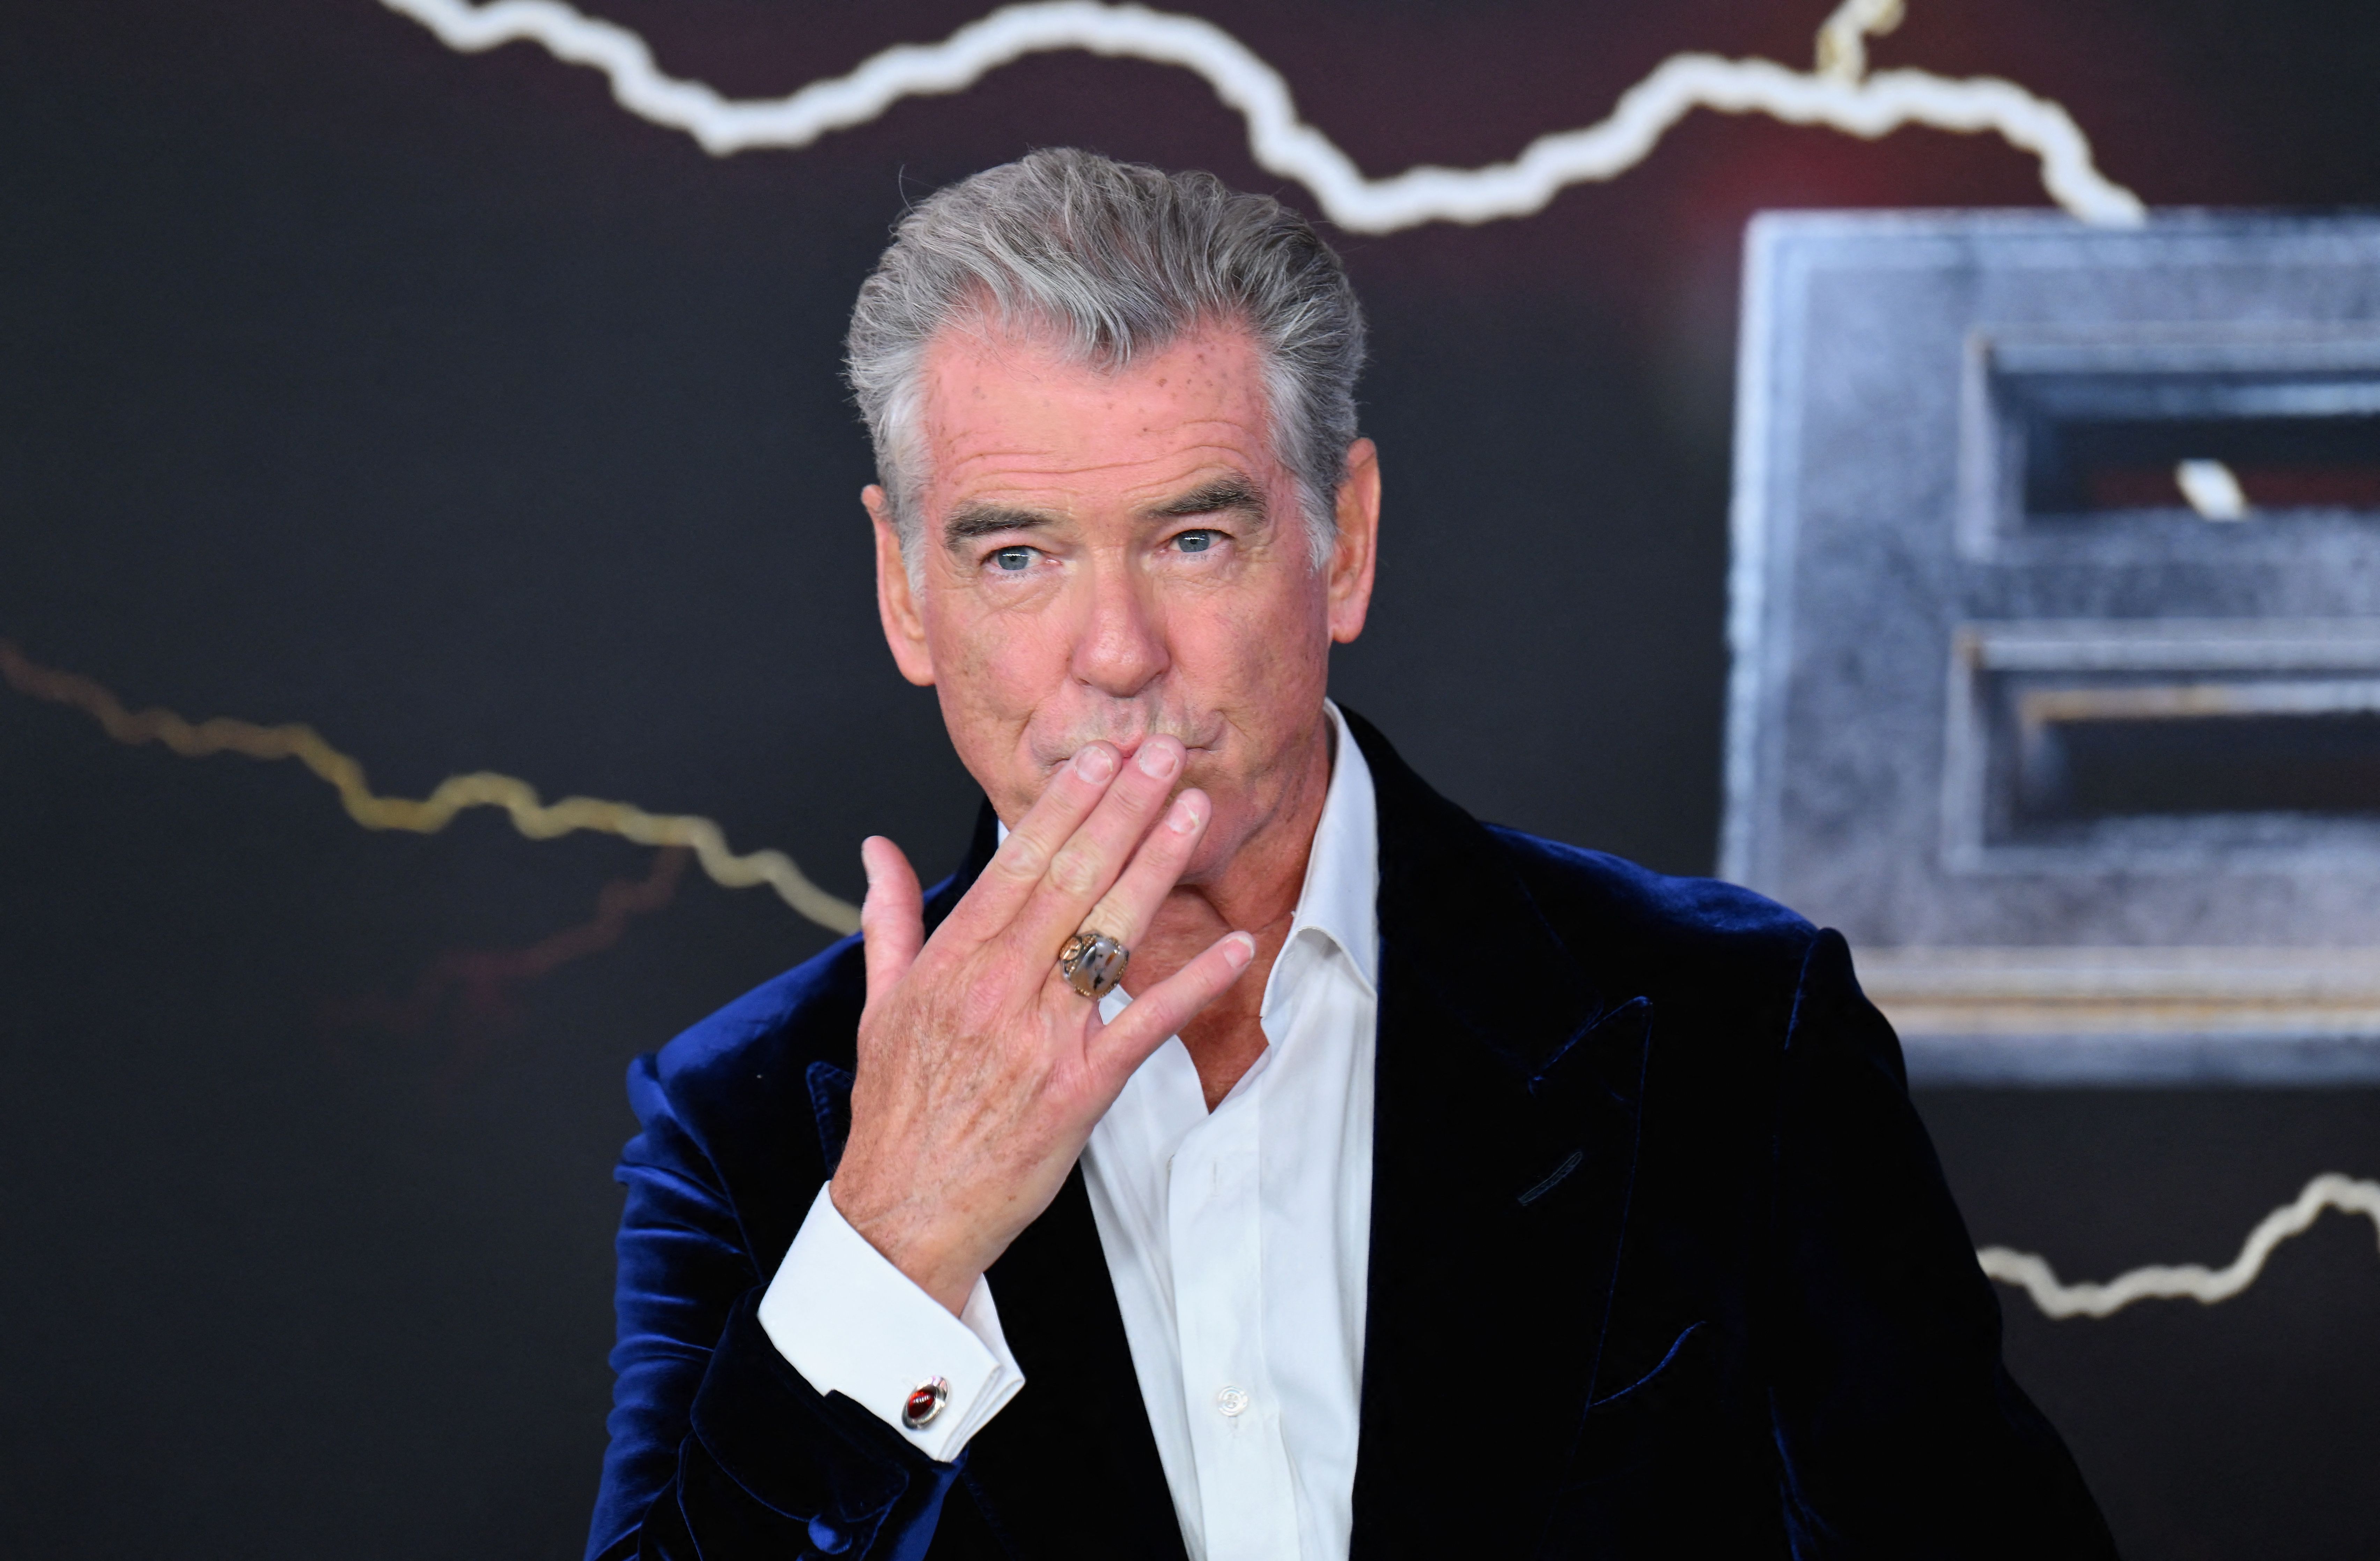 Pierce Brosnan arrives at the "Black Adam" premiere in Times Square, New York City, on October 12, 2022 | Source: Getty Images